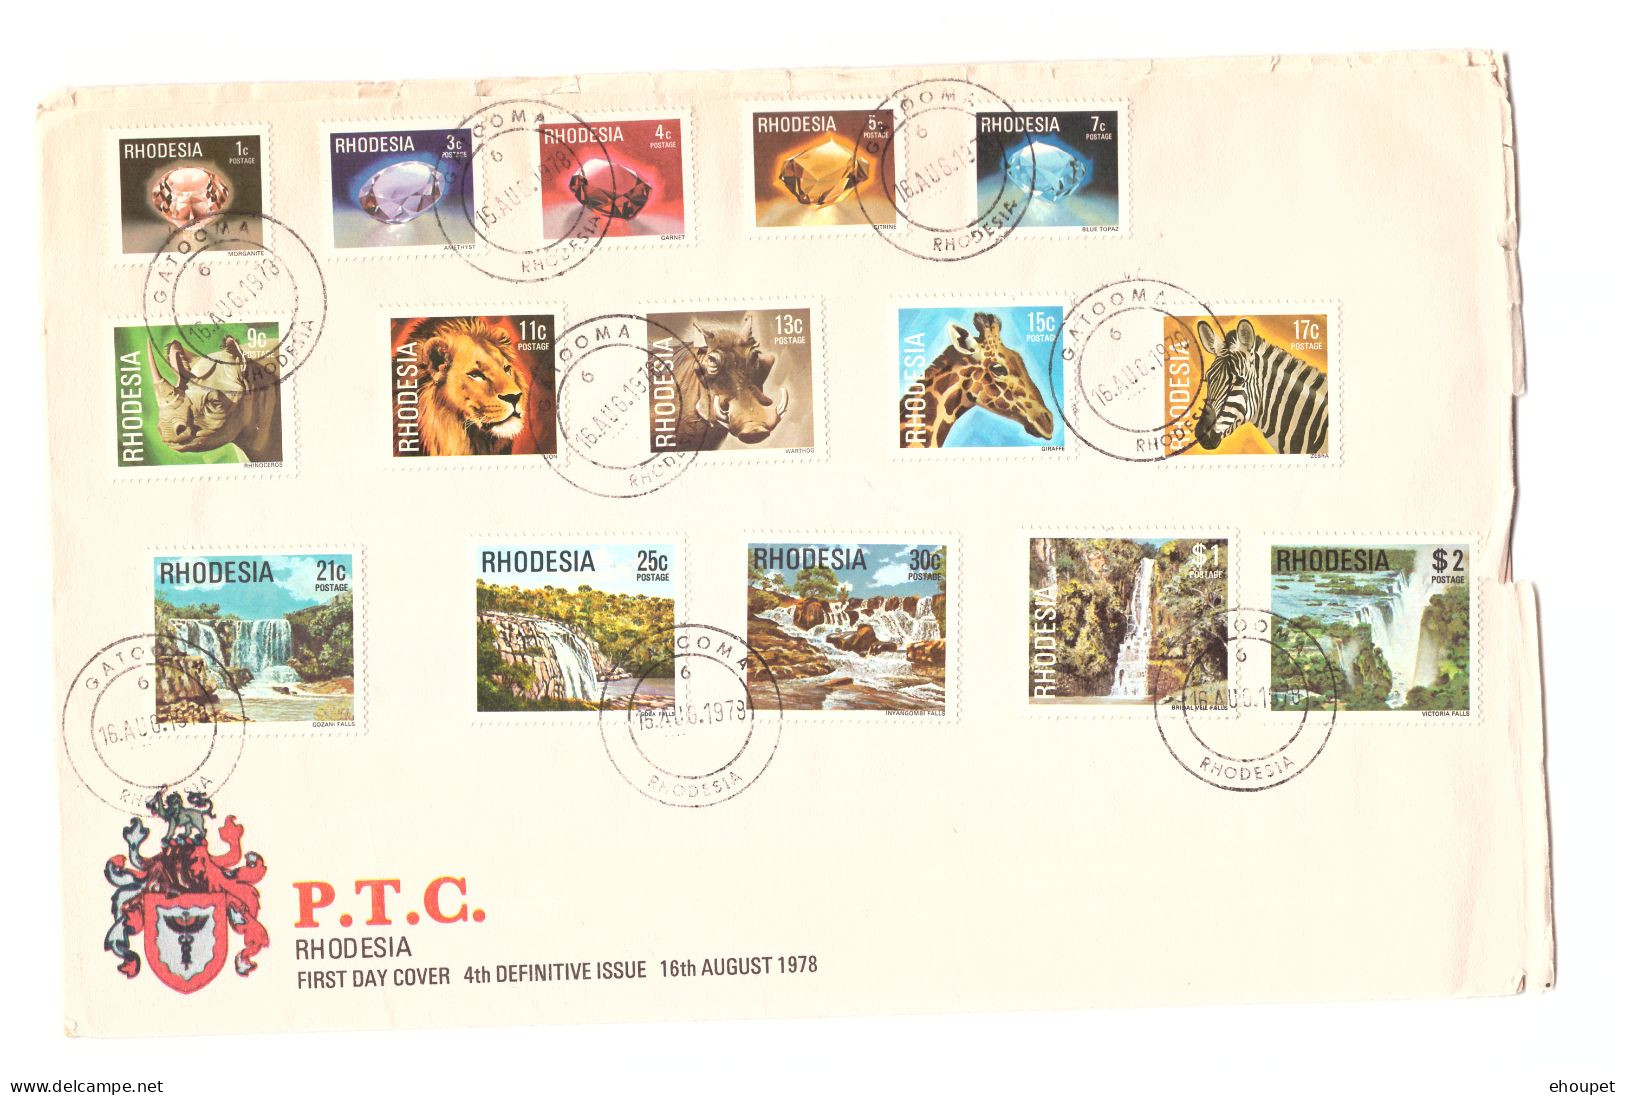 FDC 16 AOUT 1978  4TH DEFINITIVE ISSUE - Rhodesien (1964-1980)